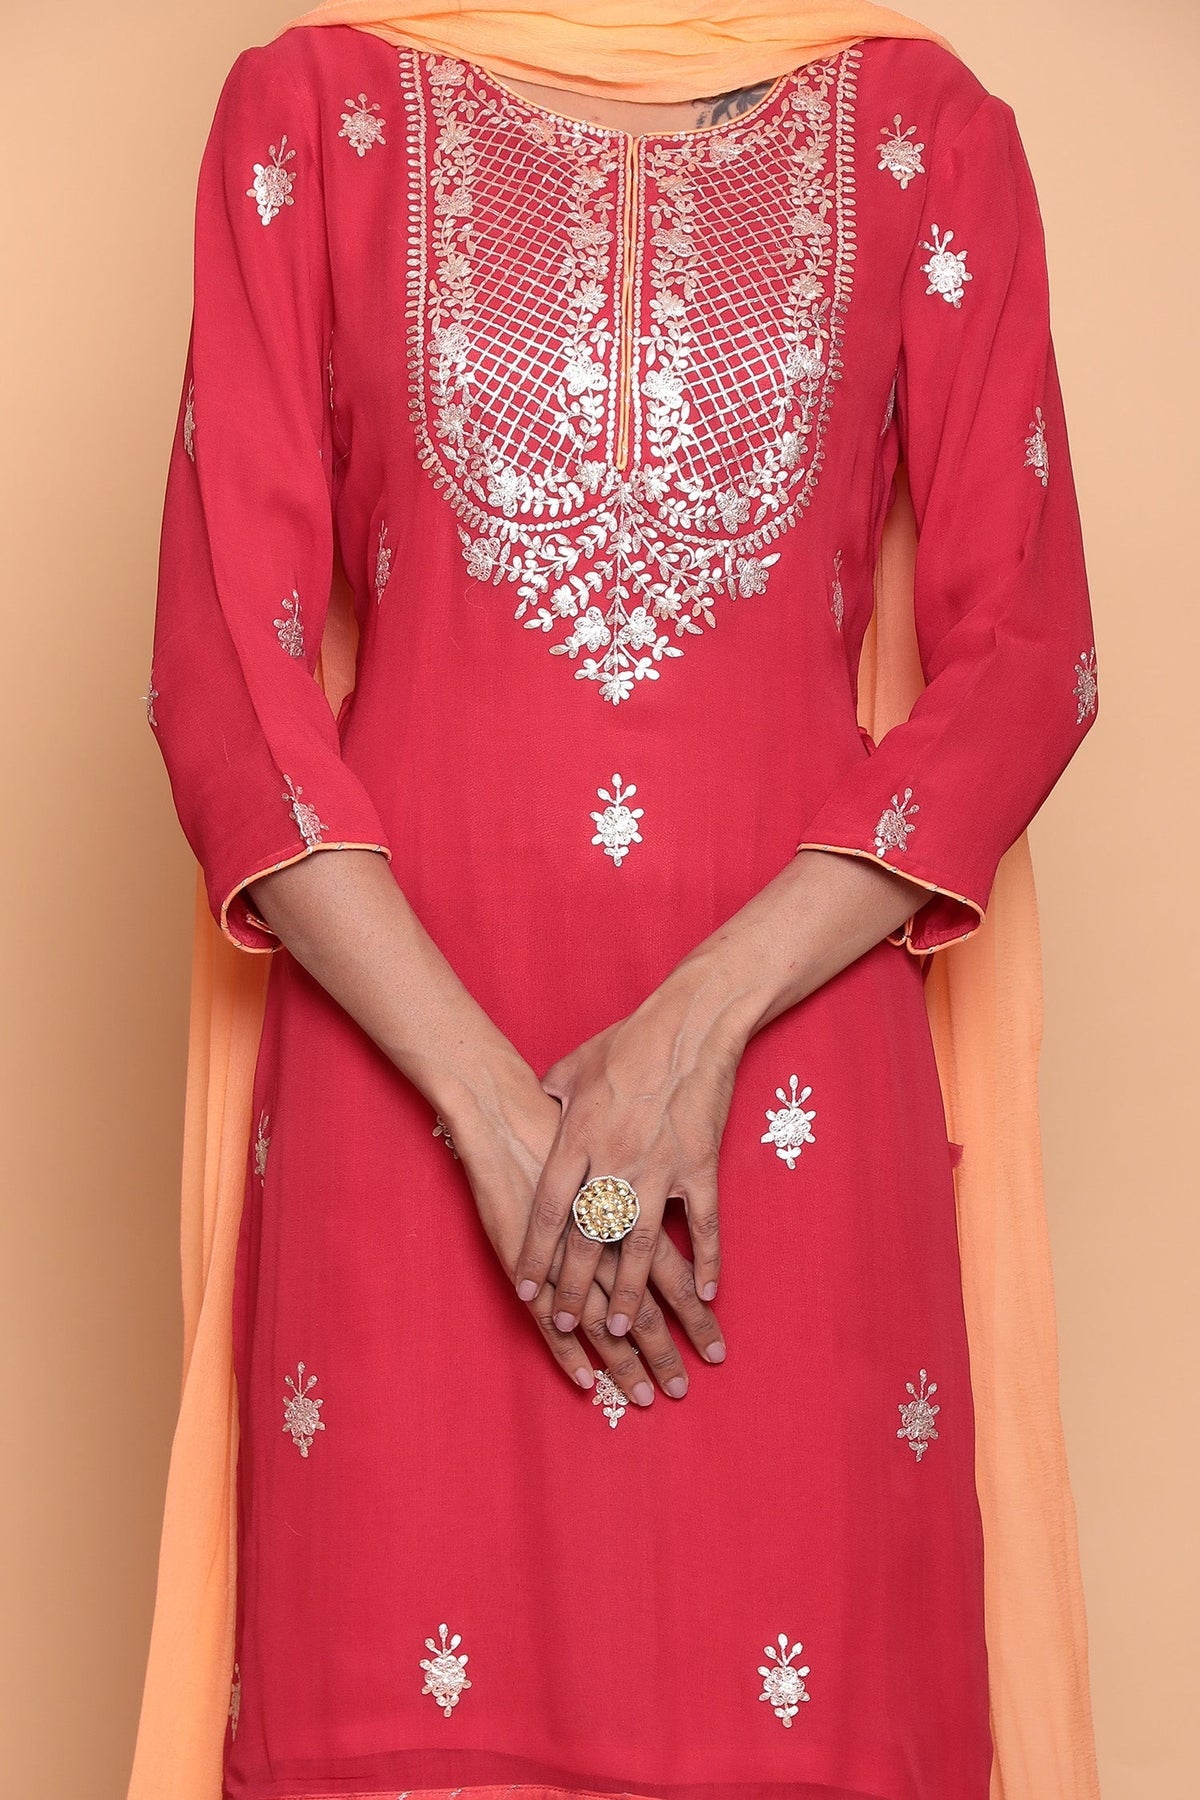 Buy Gully Chiq Red earth melange Cotton suit set with Pittan work -Red,  blue & beige at Amazon.in